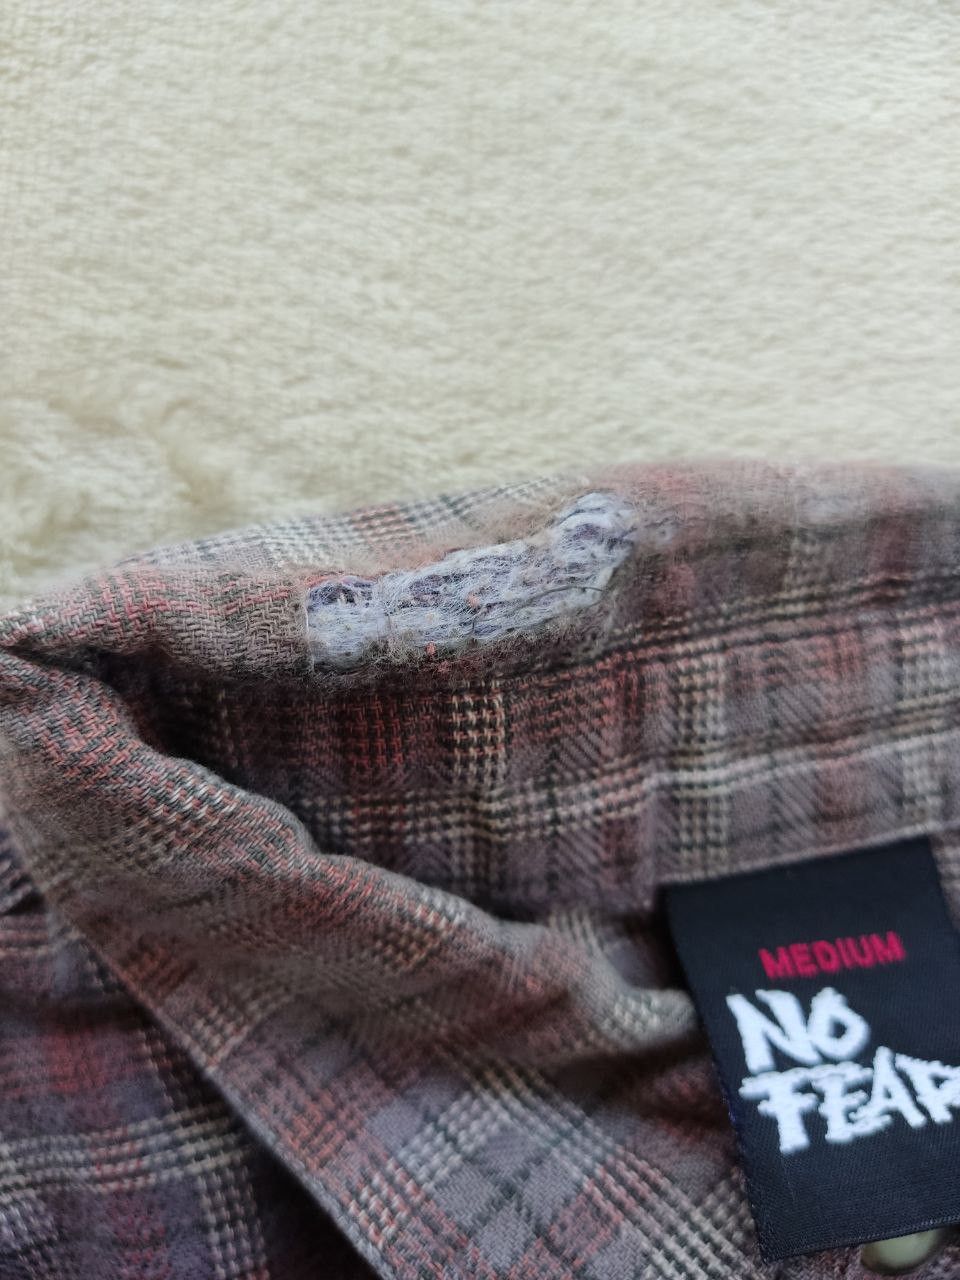 Vintage 90s No Fear Made in USA Old Skool Plaid Shirt - 7